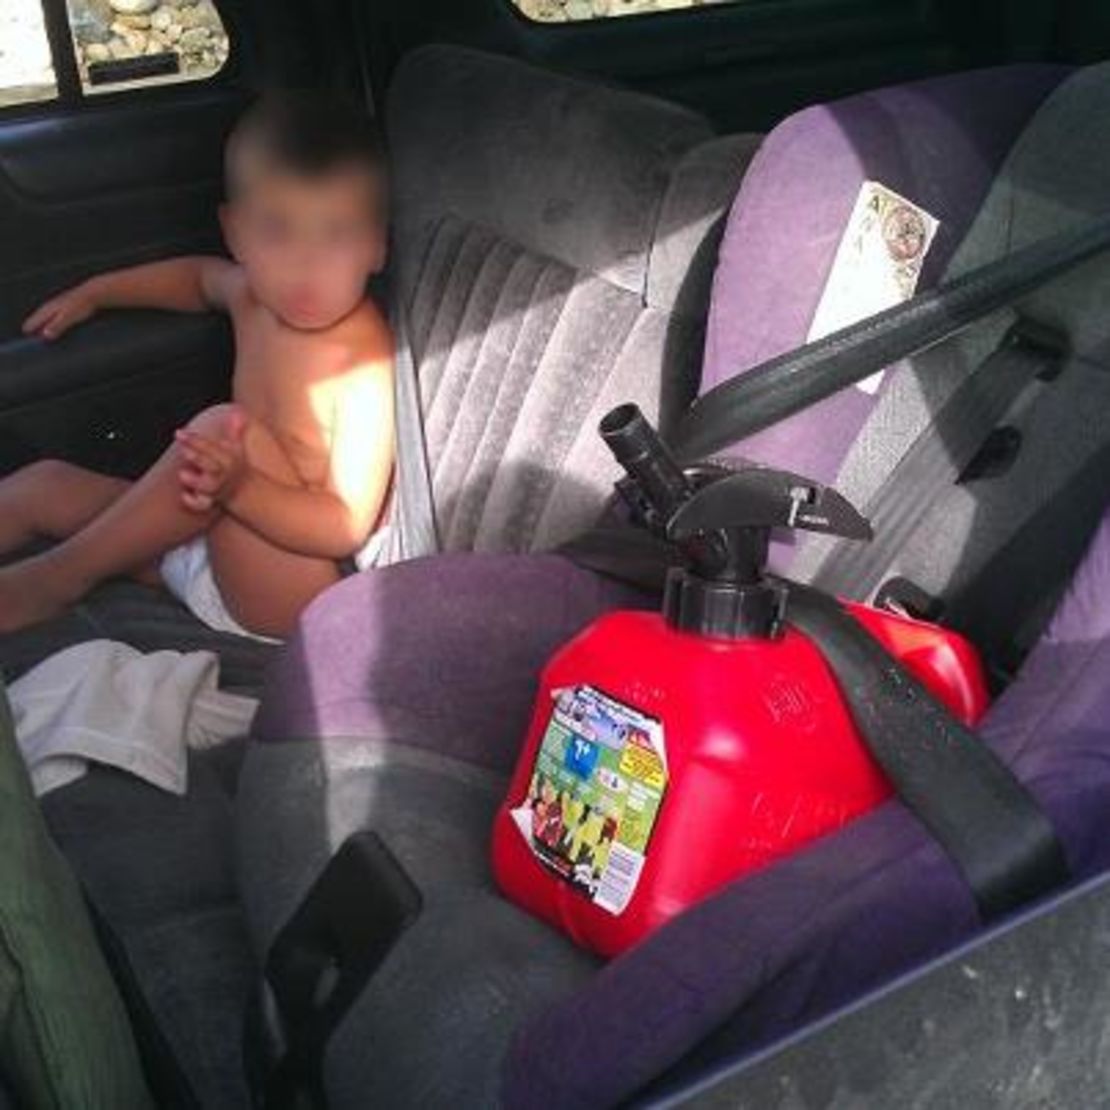 A mother was cited in Aurora, Colorado, after authorities found her toddler in a lap belt and a gas can in a child safety seat.